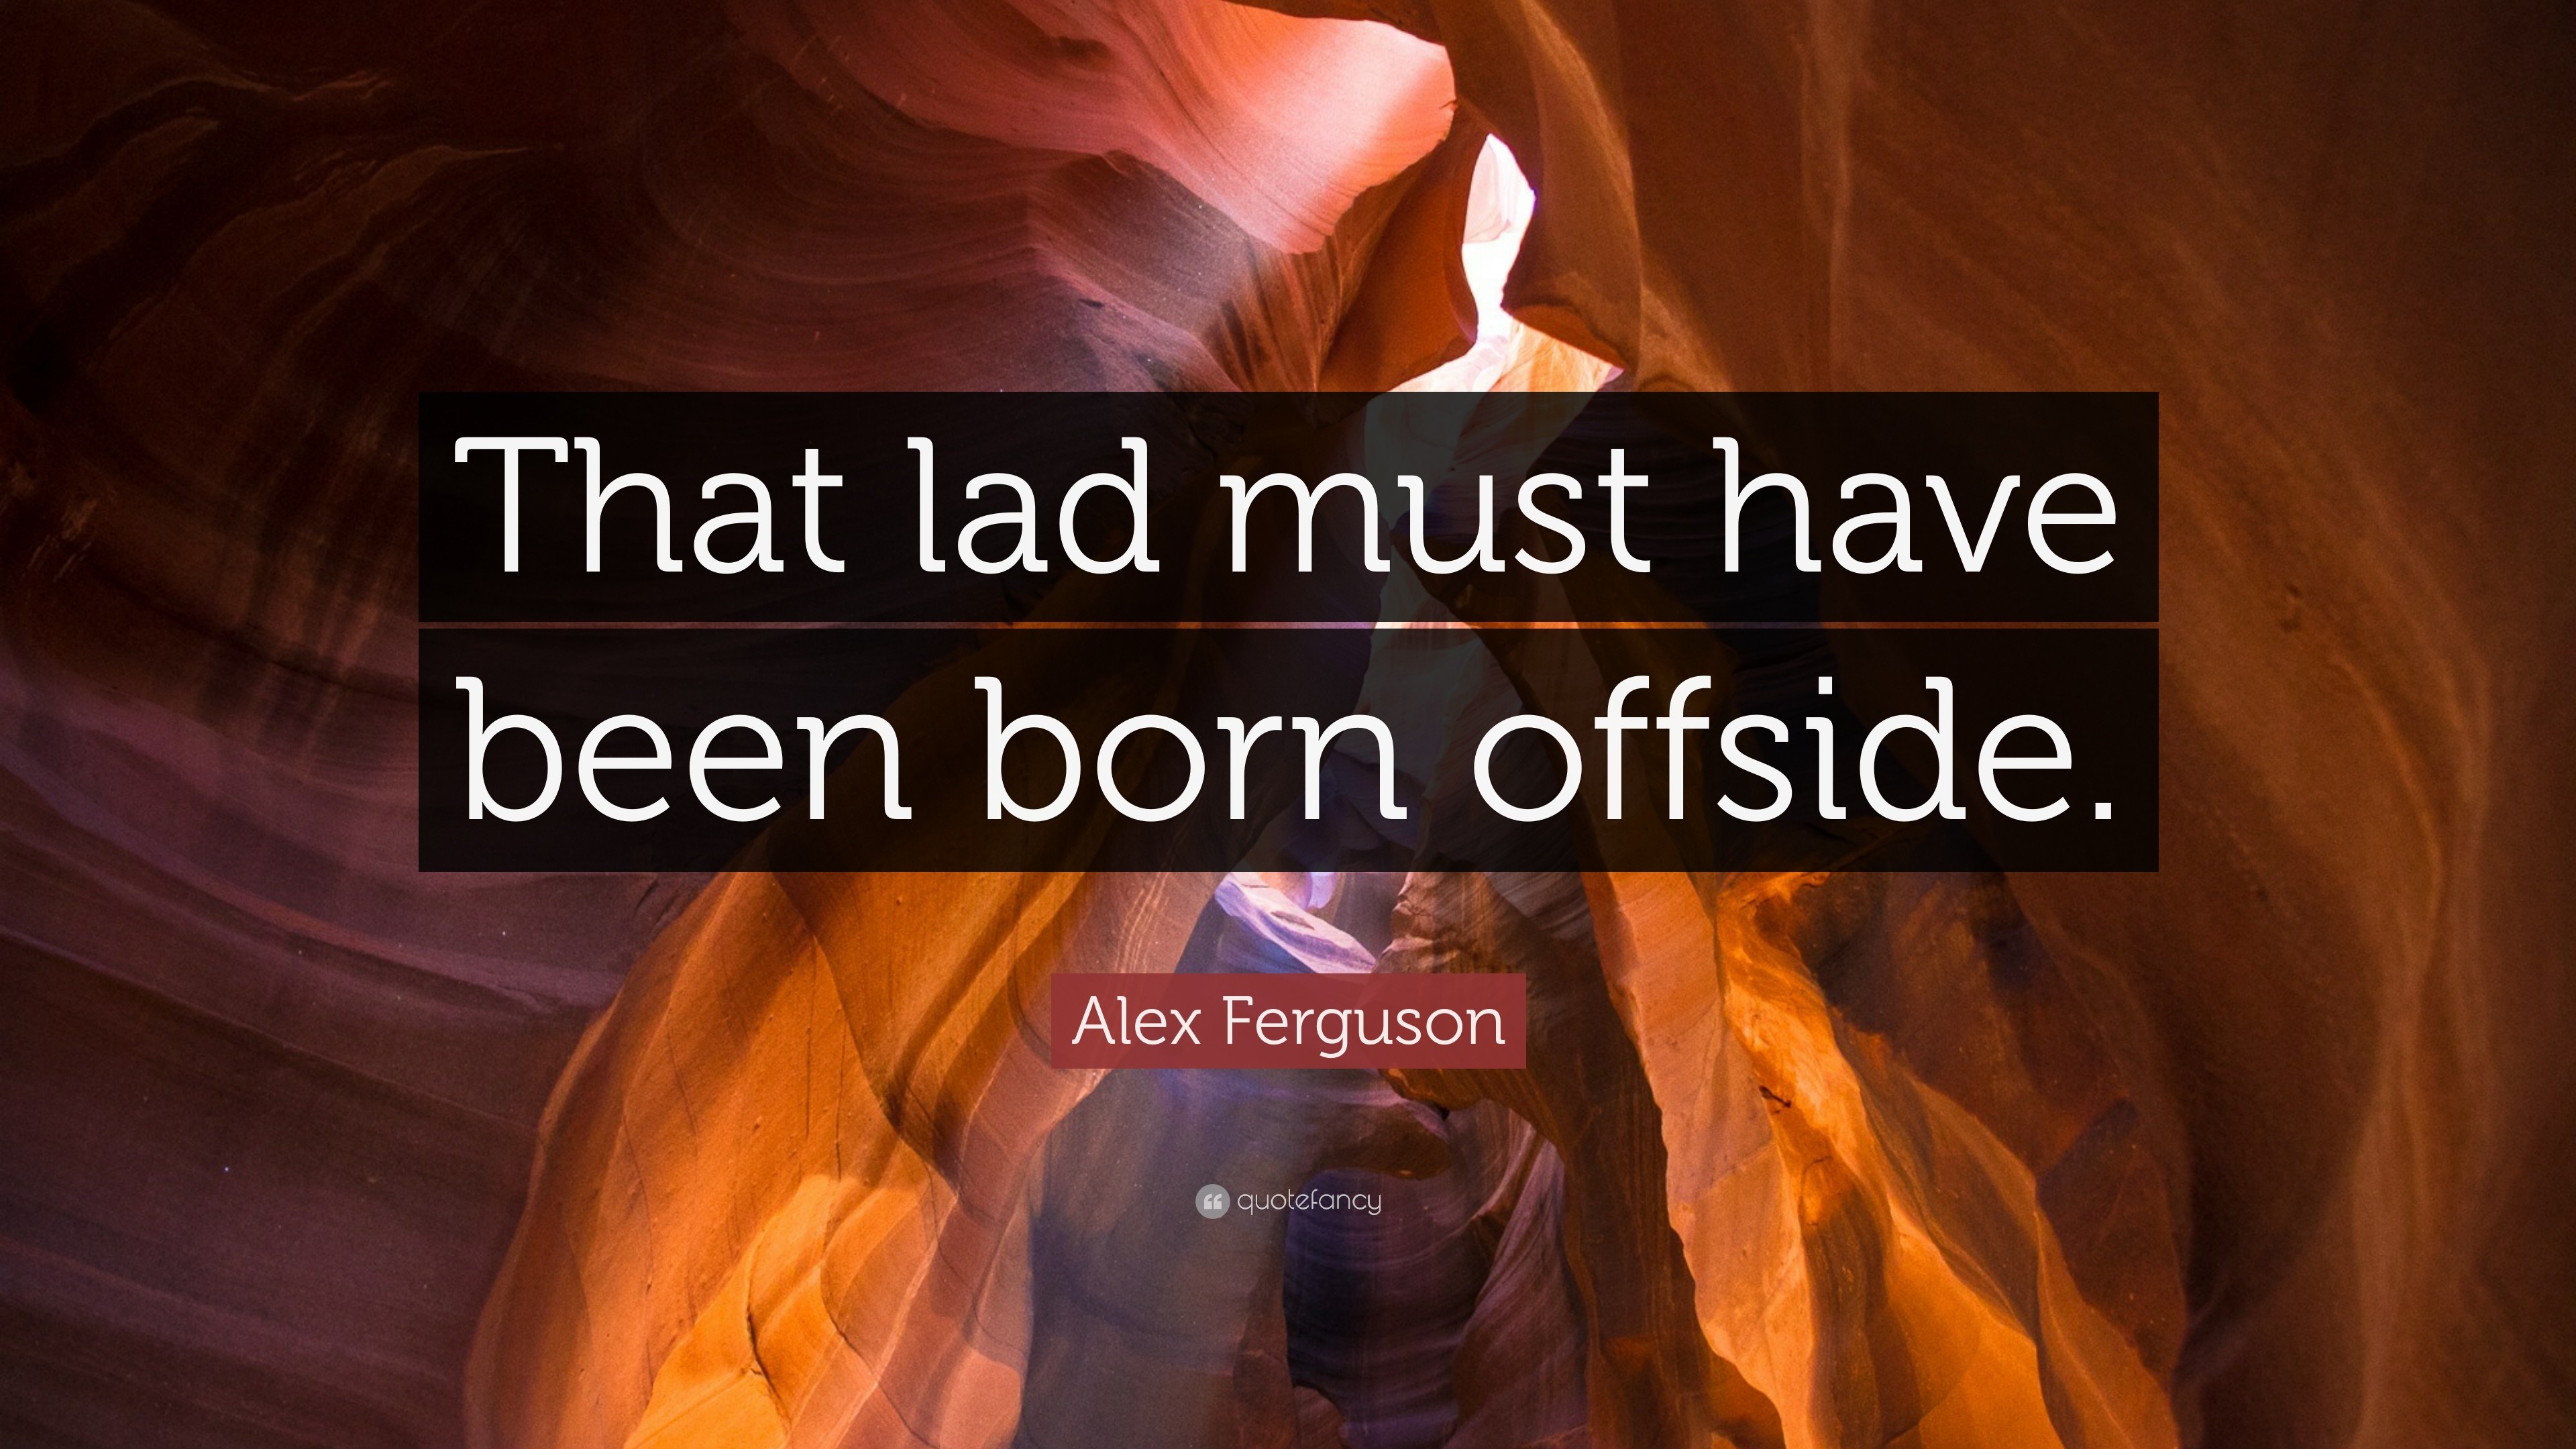 3840x2160 Alex Ferguson Quote: “That lad must have been born offside.”